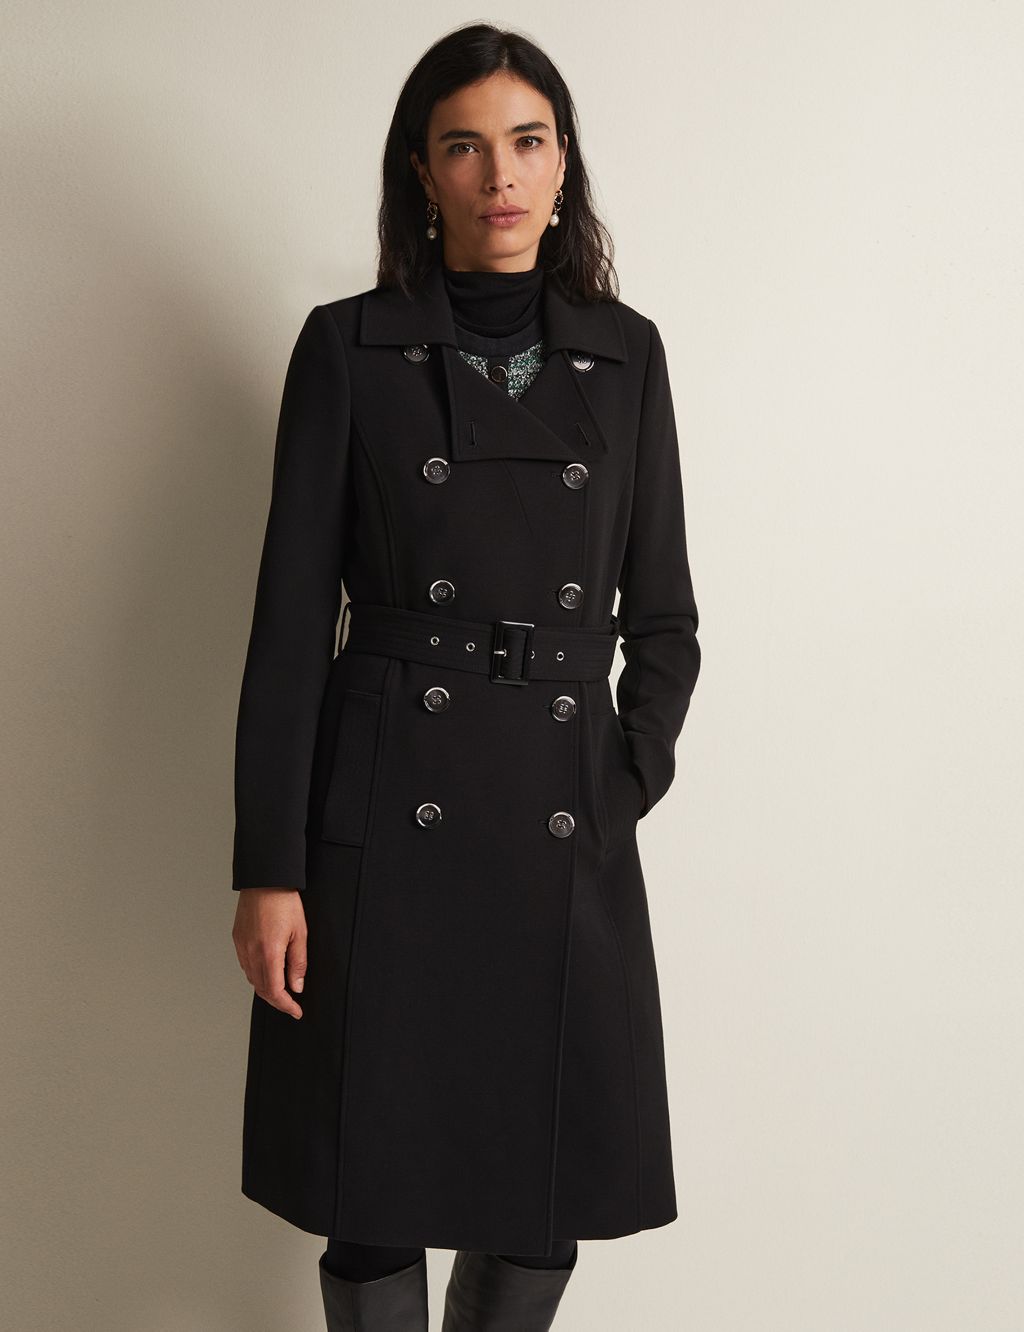 Wool Rich Belted Double Breasted Trench Coat image 1